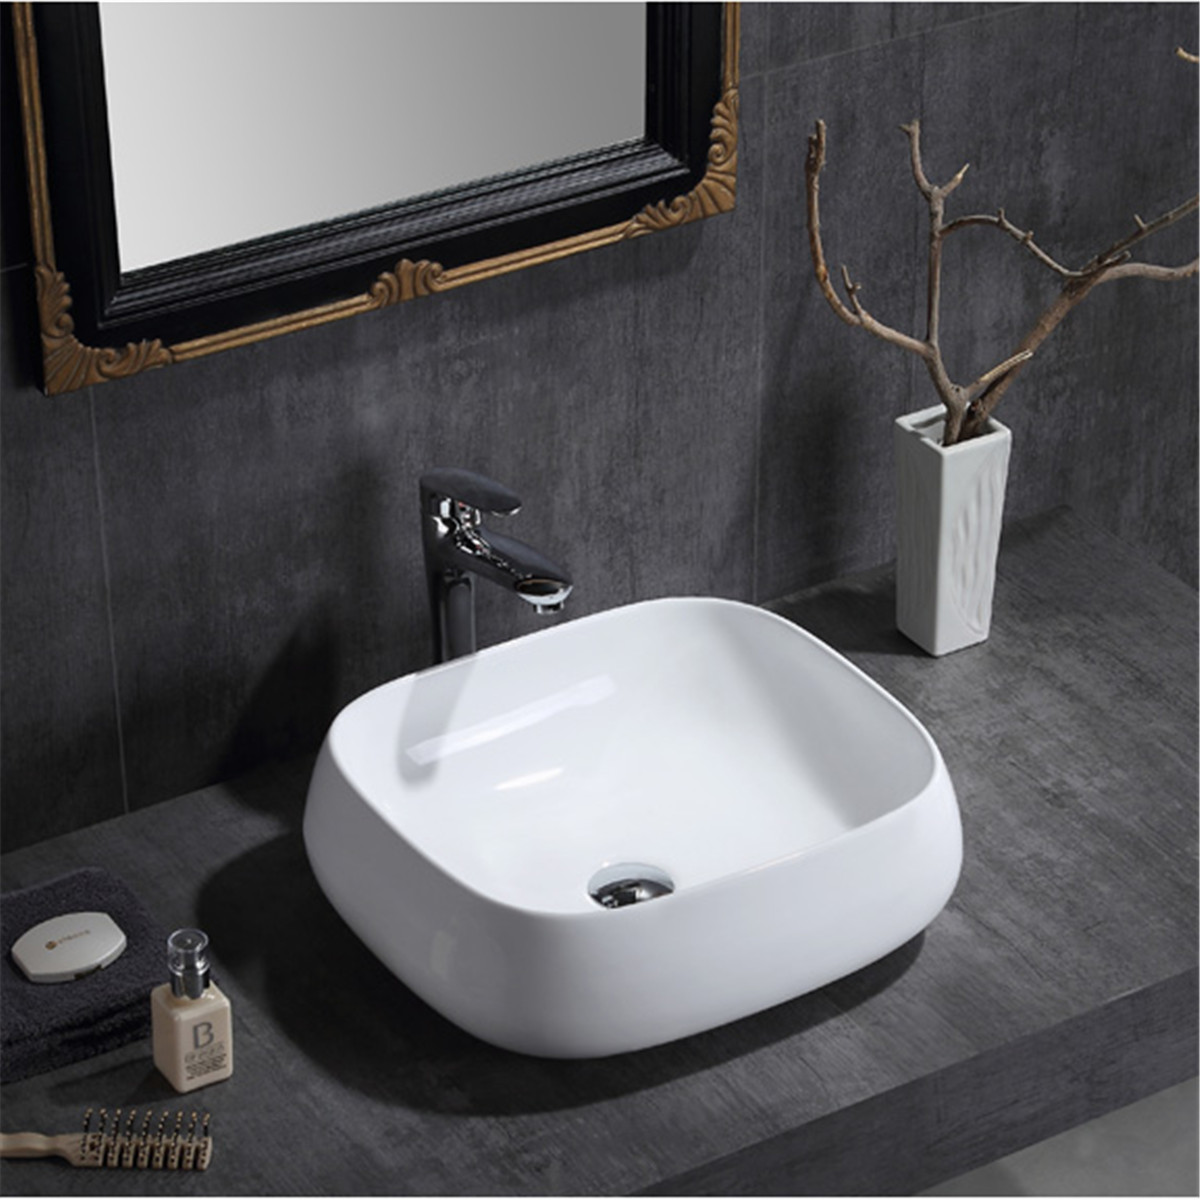 The white wash sinks & Art Basins manufacture from China , produce to wholesalers